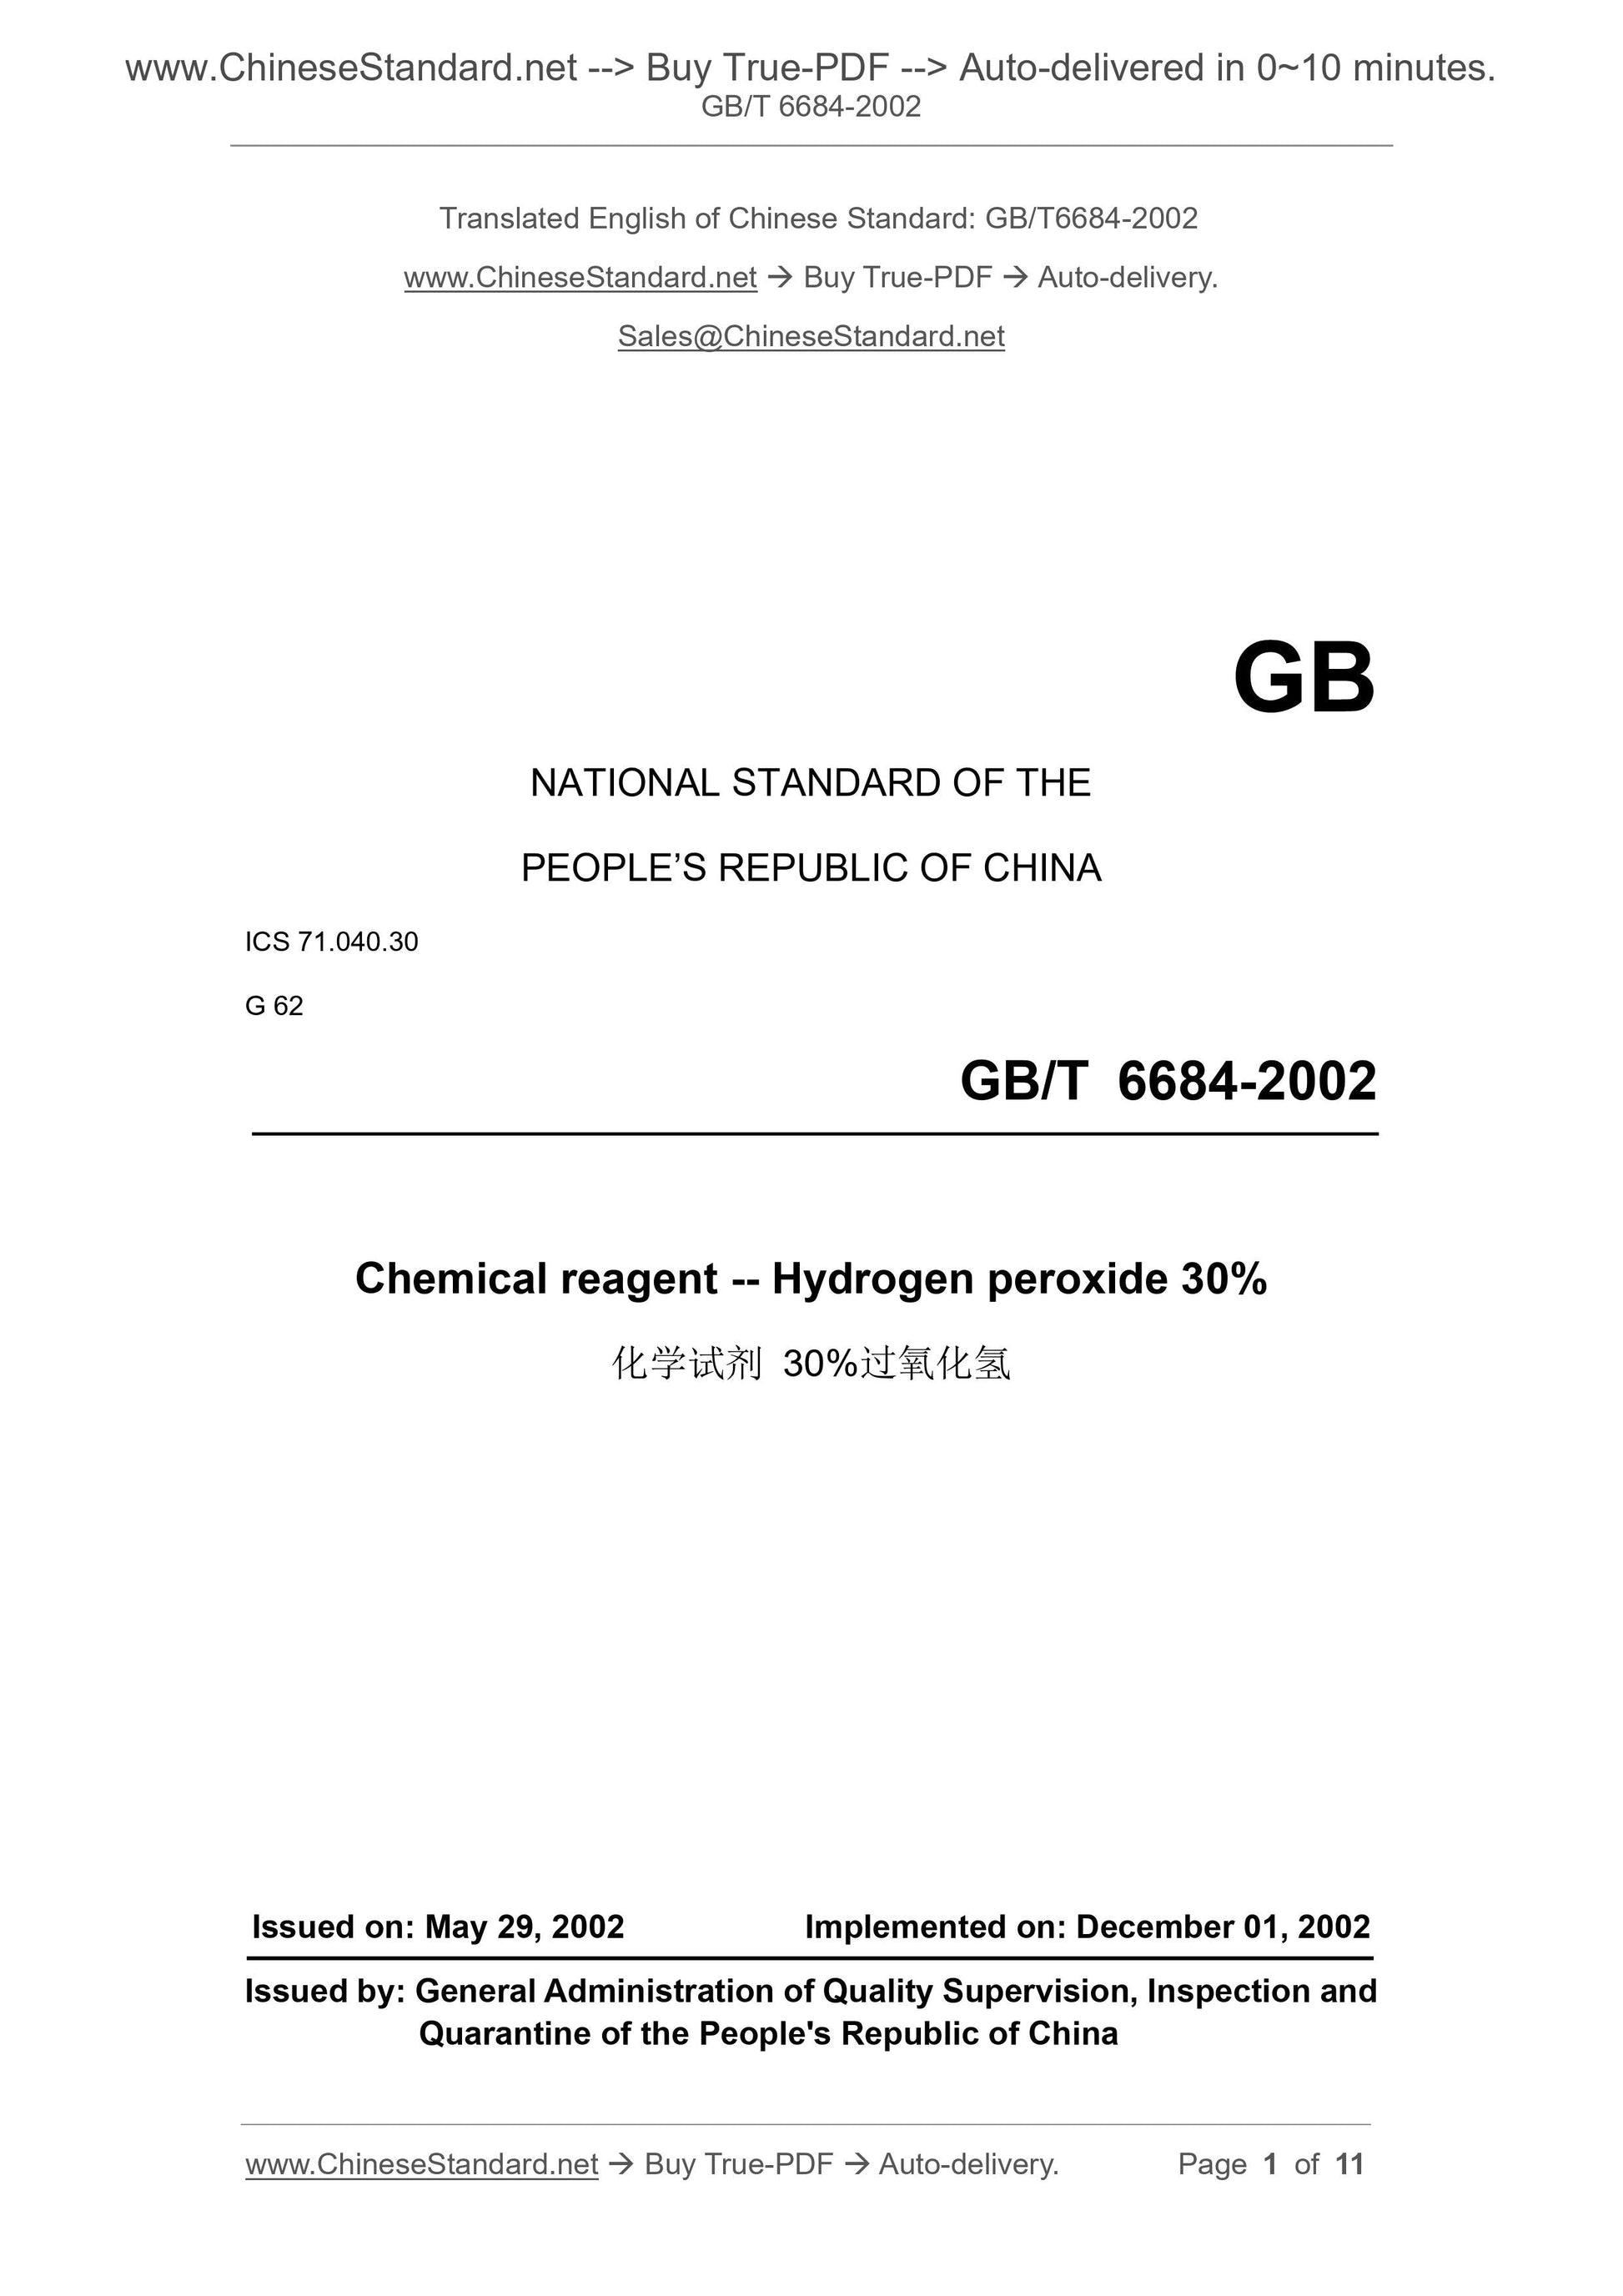 GB/T 6684-2002 Page 1